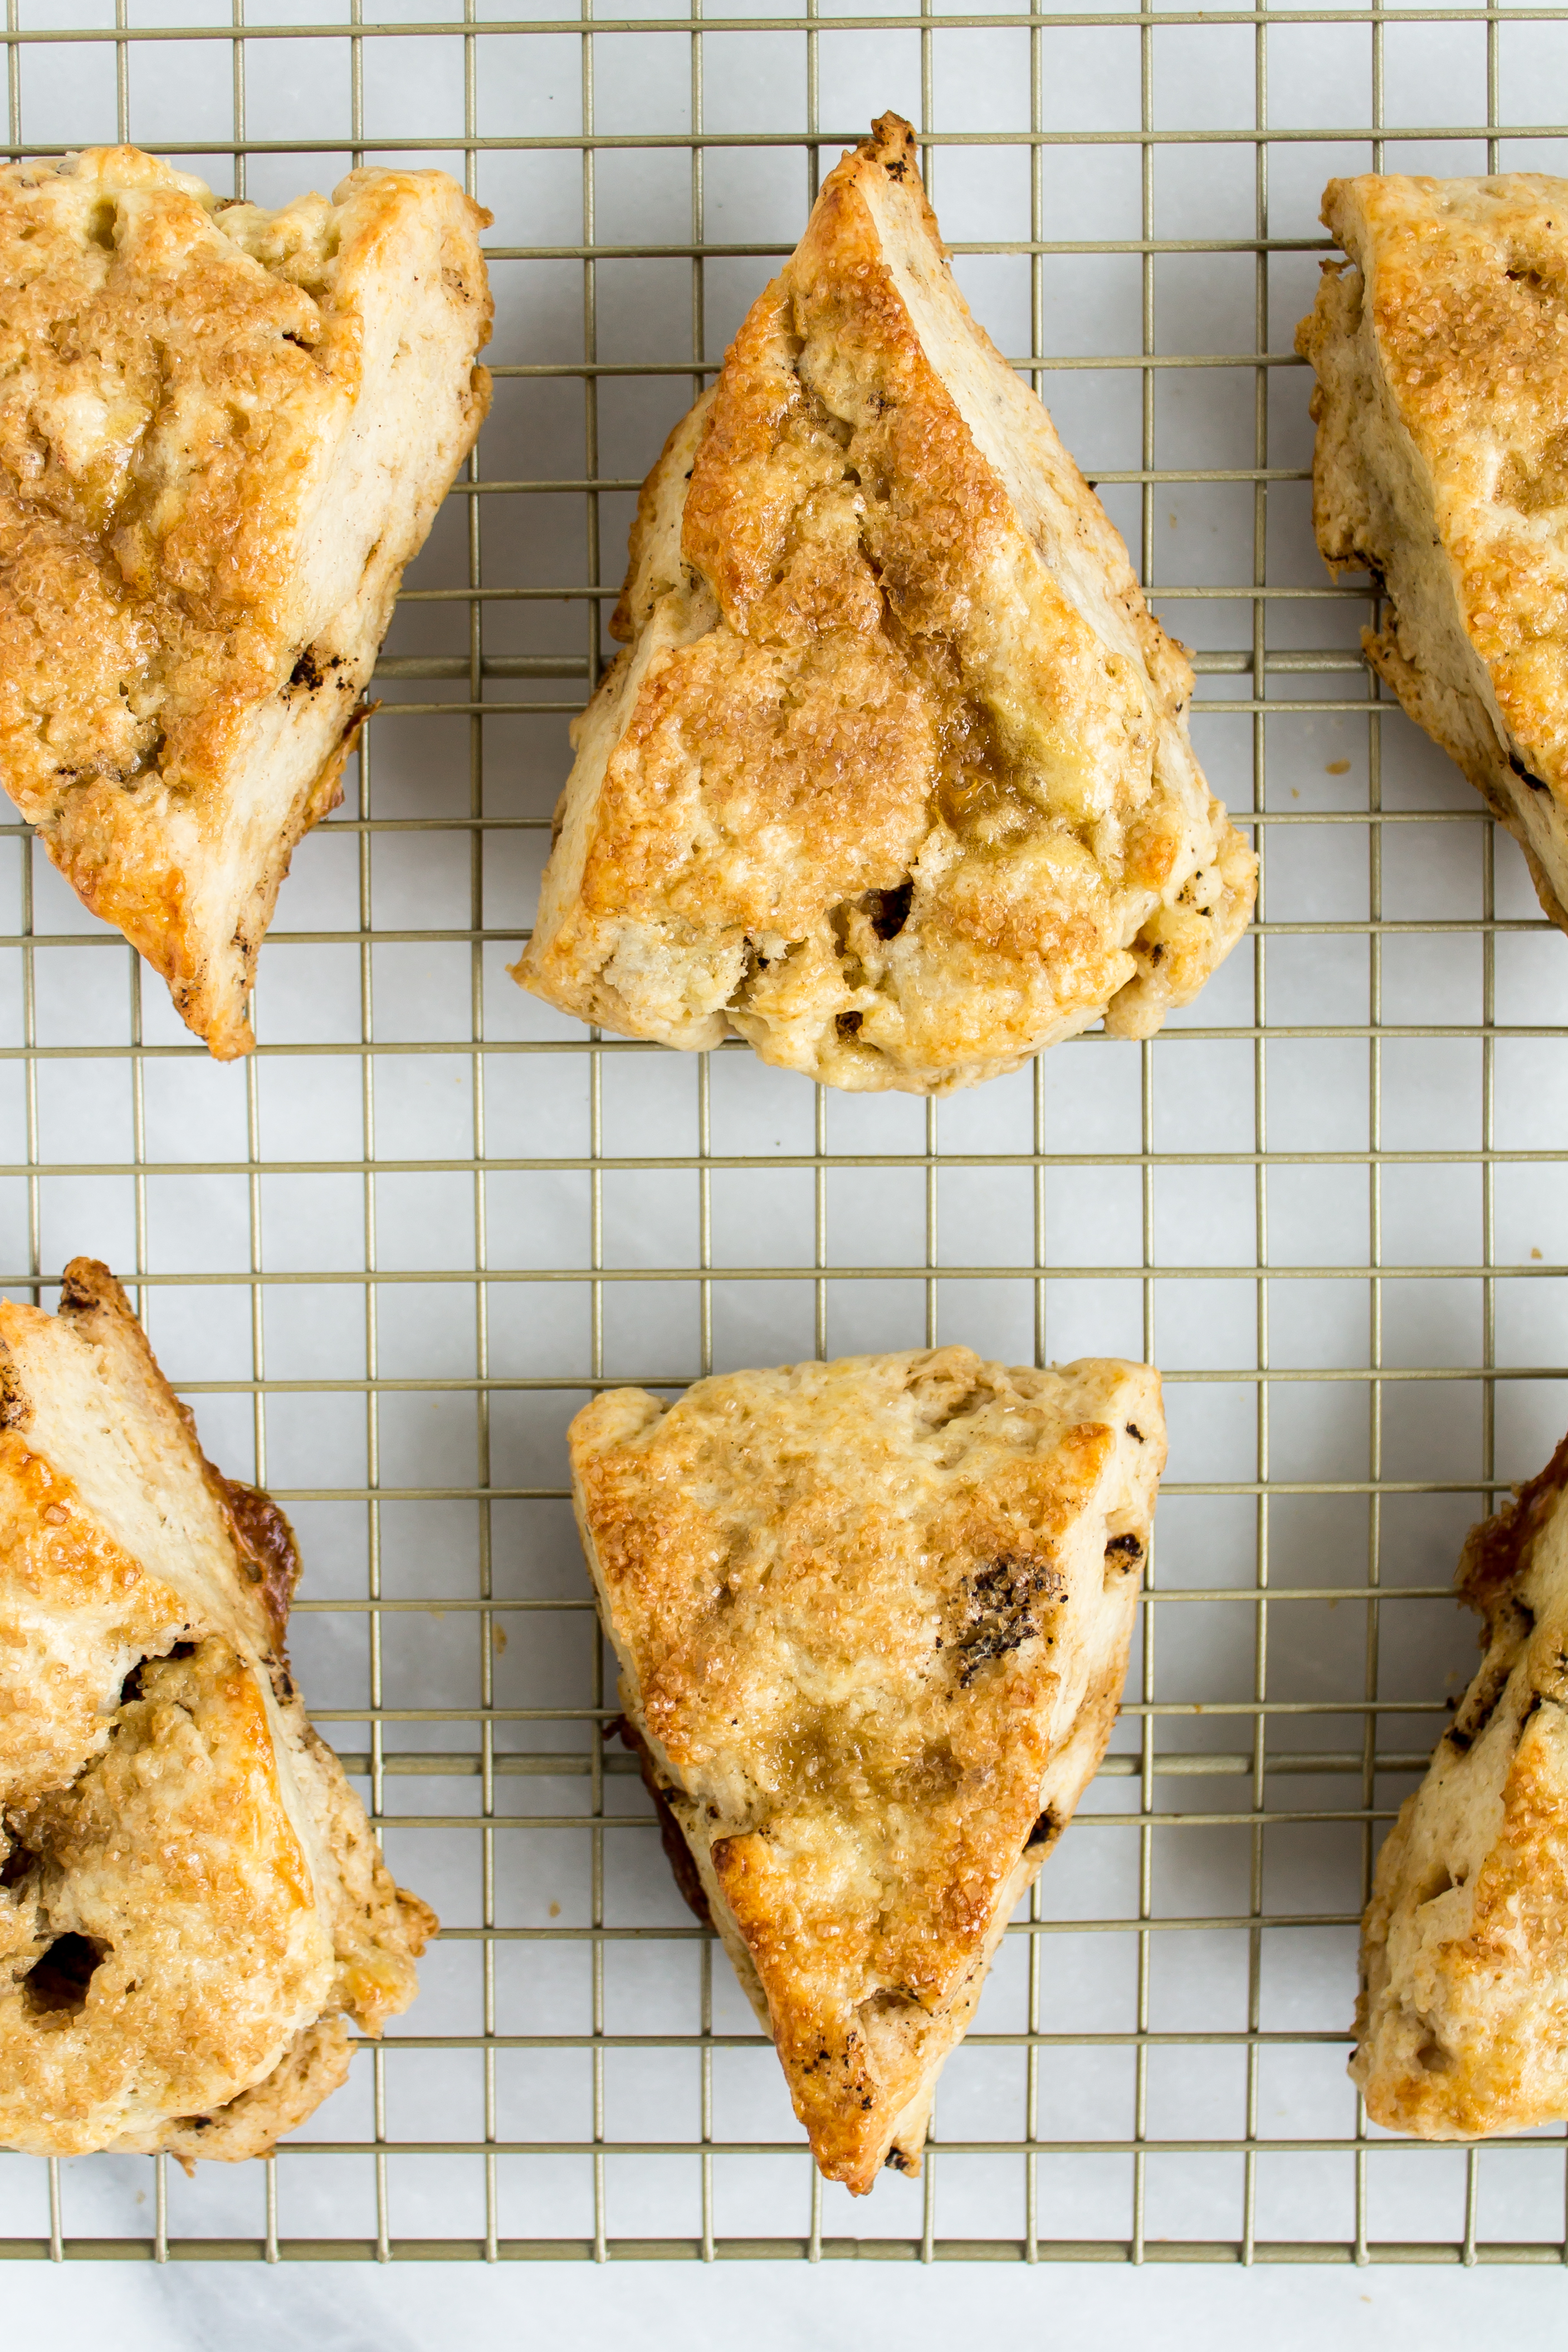 Brown butter scones with apple cider glaze capture the fall season in a pastry so perfectly. The nutty brown butter flavor paired with the sweet, classic apple cider makes for a delicious seasonal breakfast treat that will impress all of your guests. | www.passthecookies.com